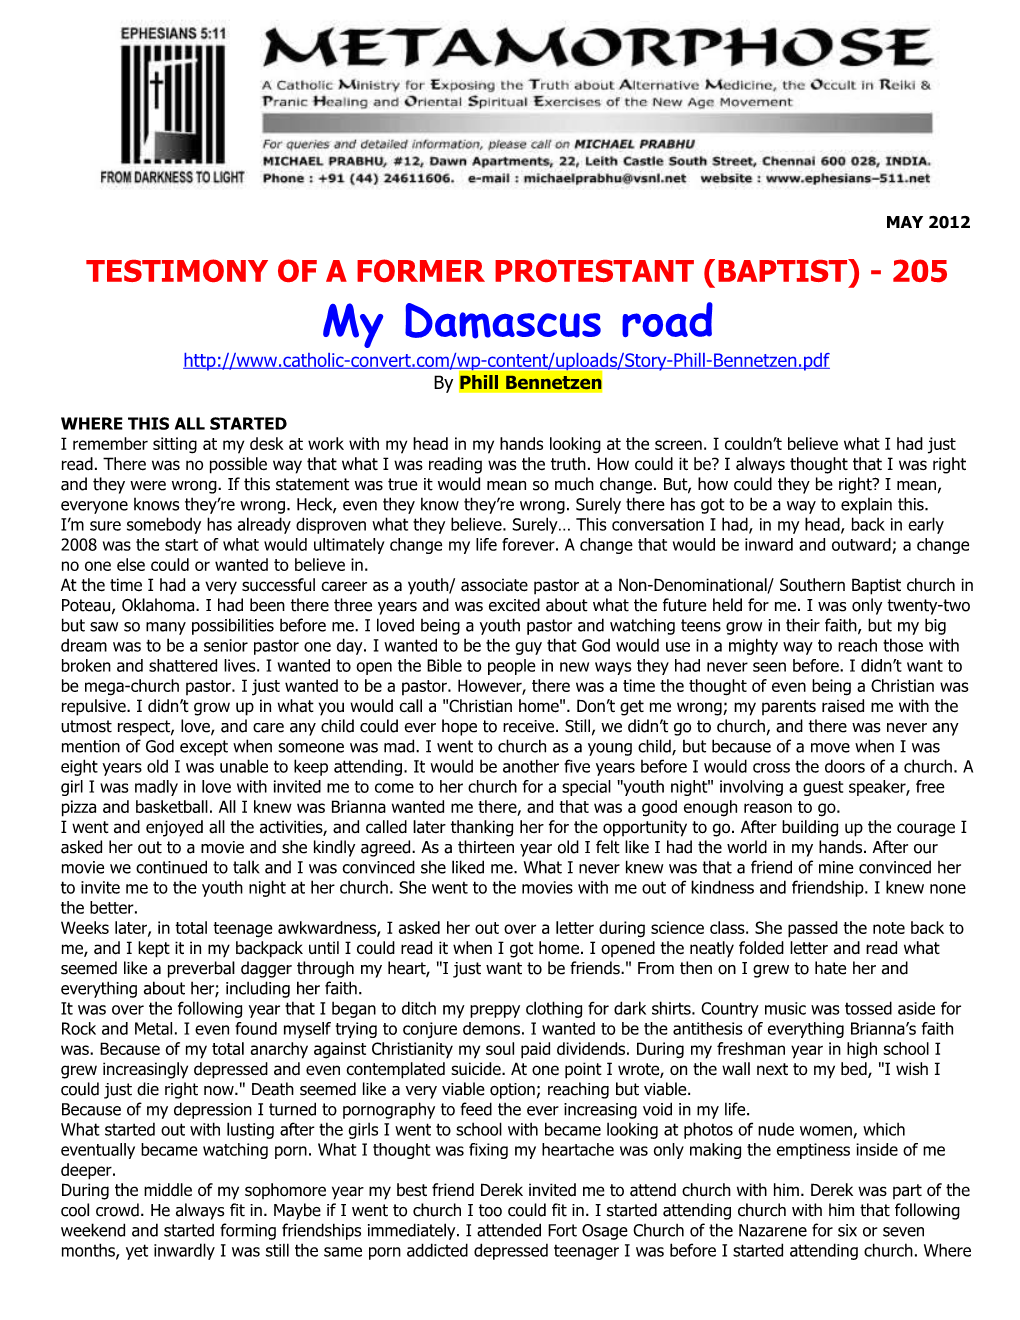 Testimony of a Former Protestant (Baptist)-205